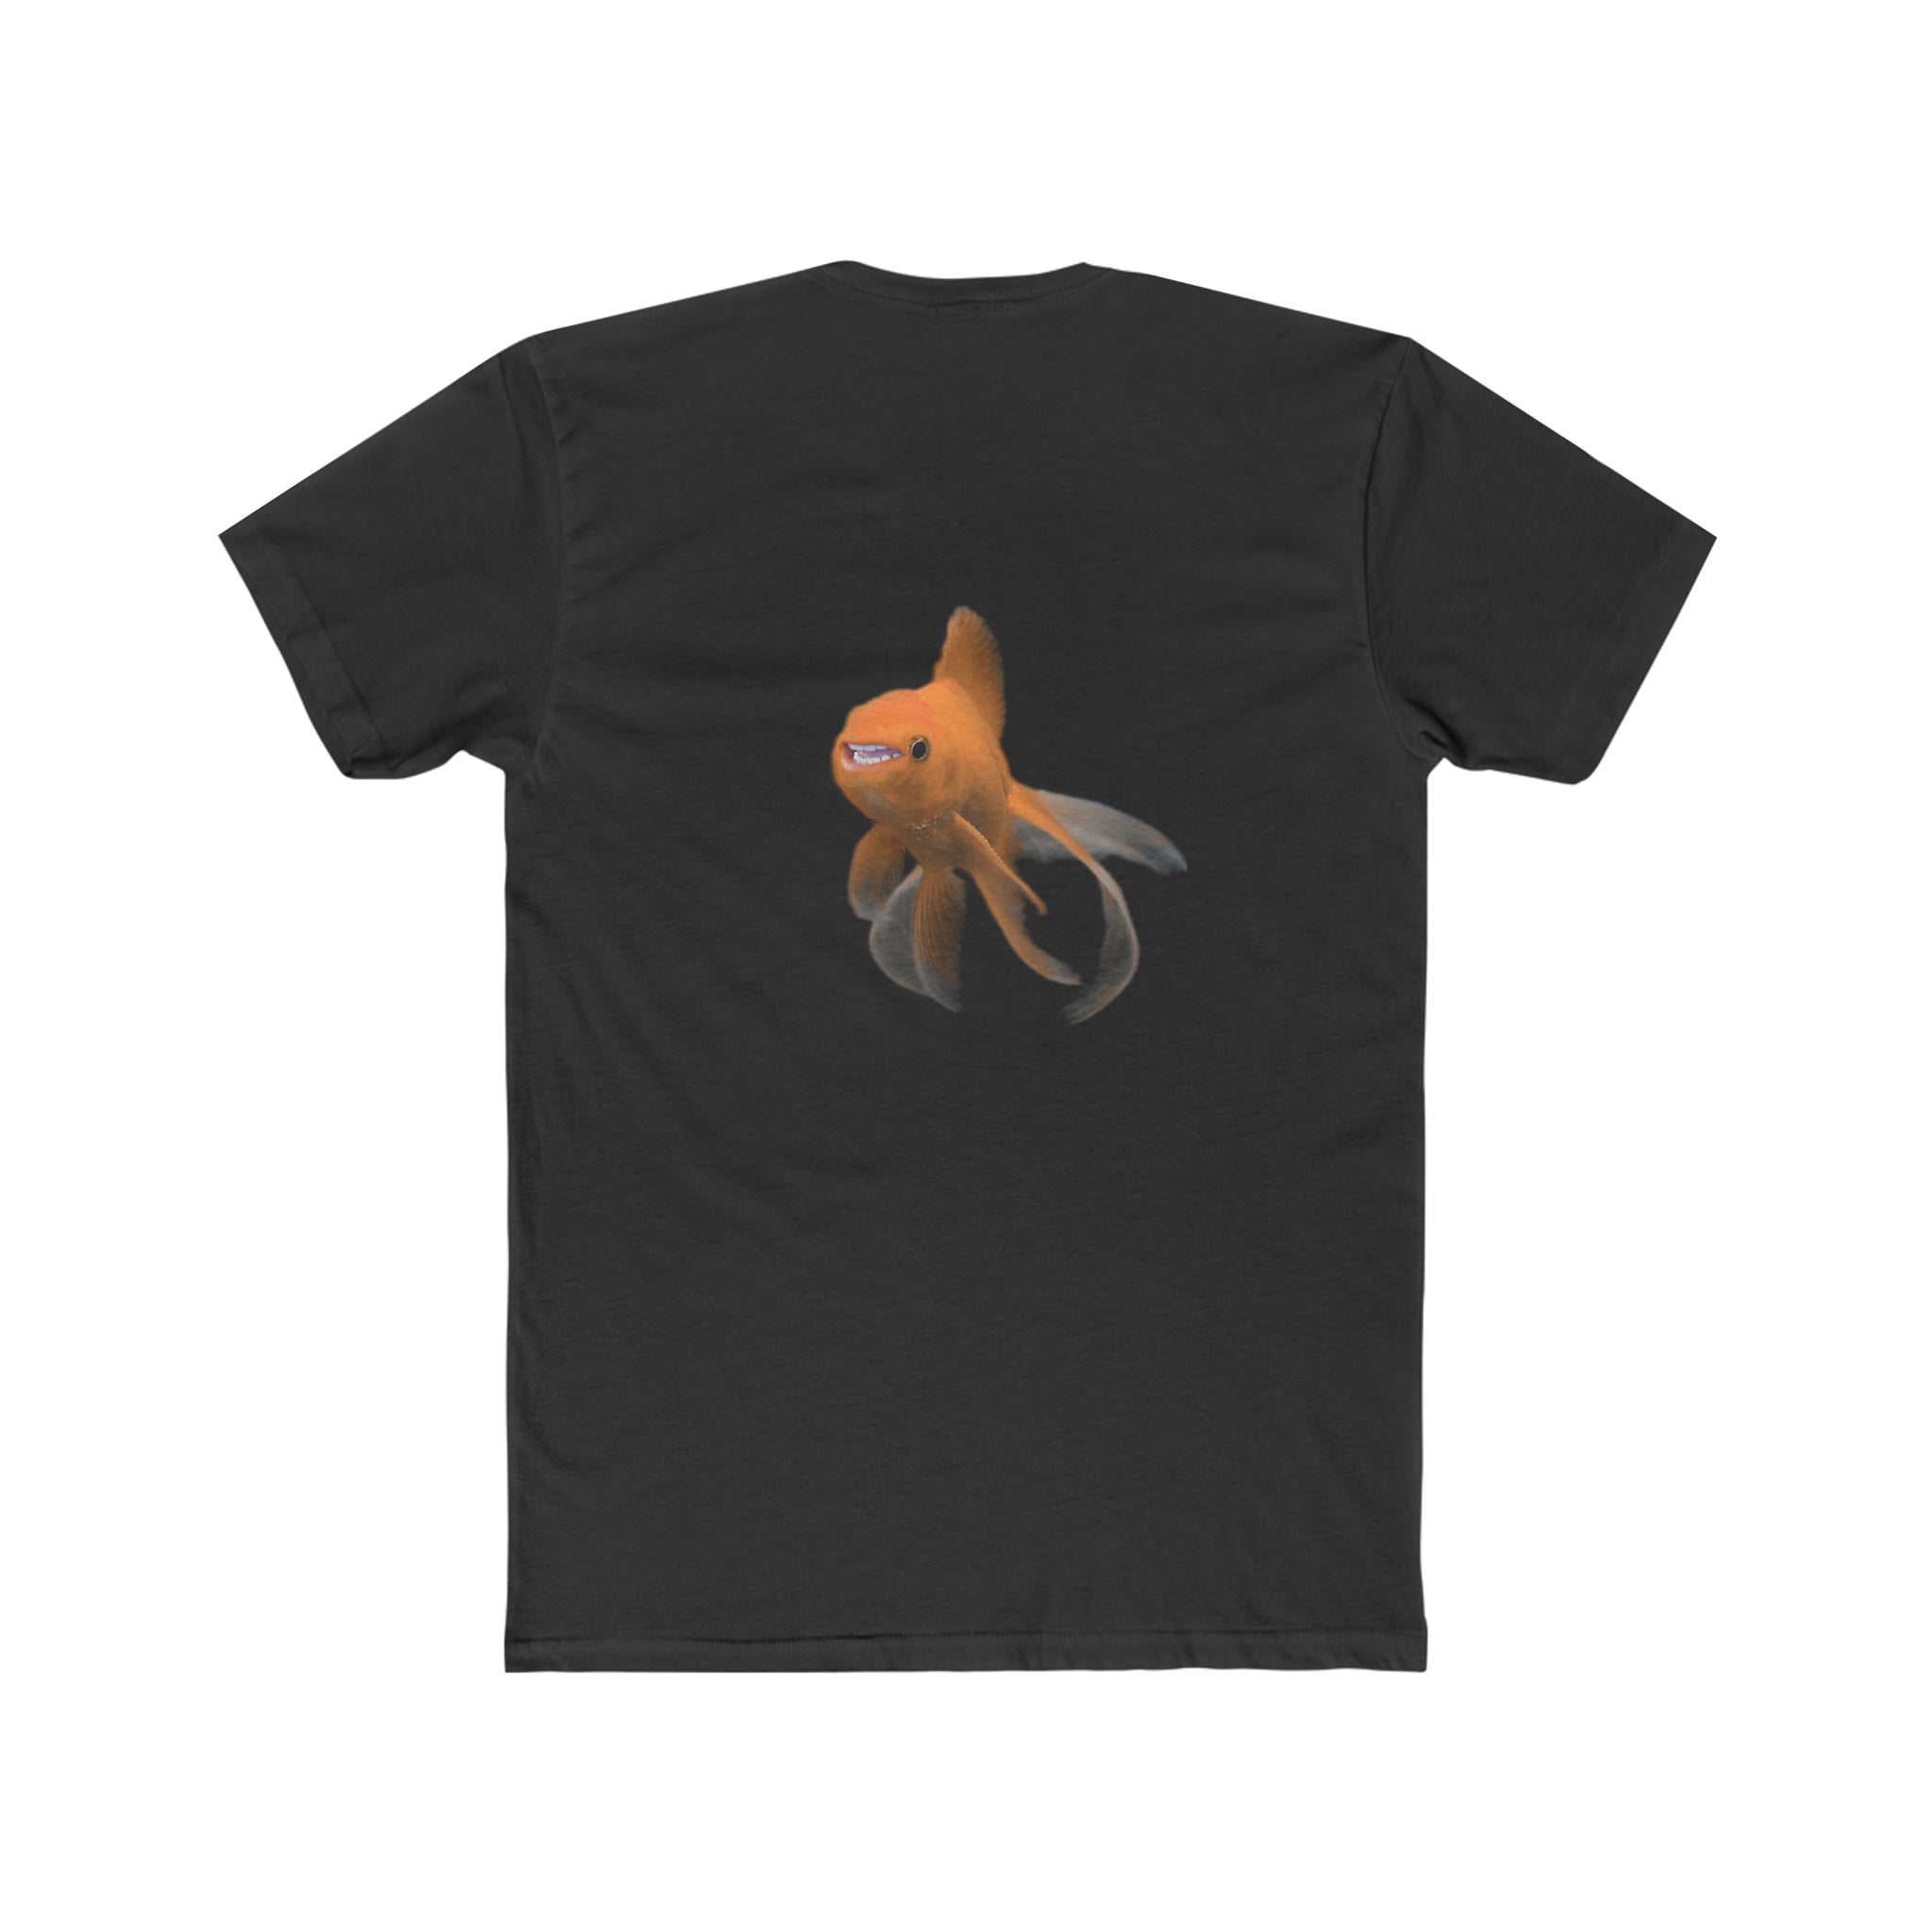 Hecklefish on the Back Cotton Crew Tee